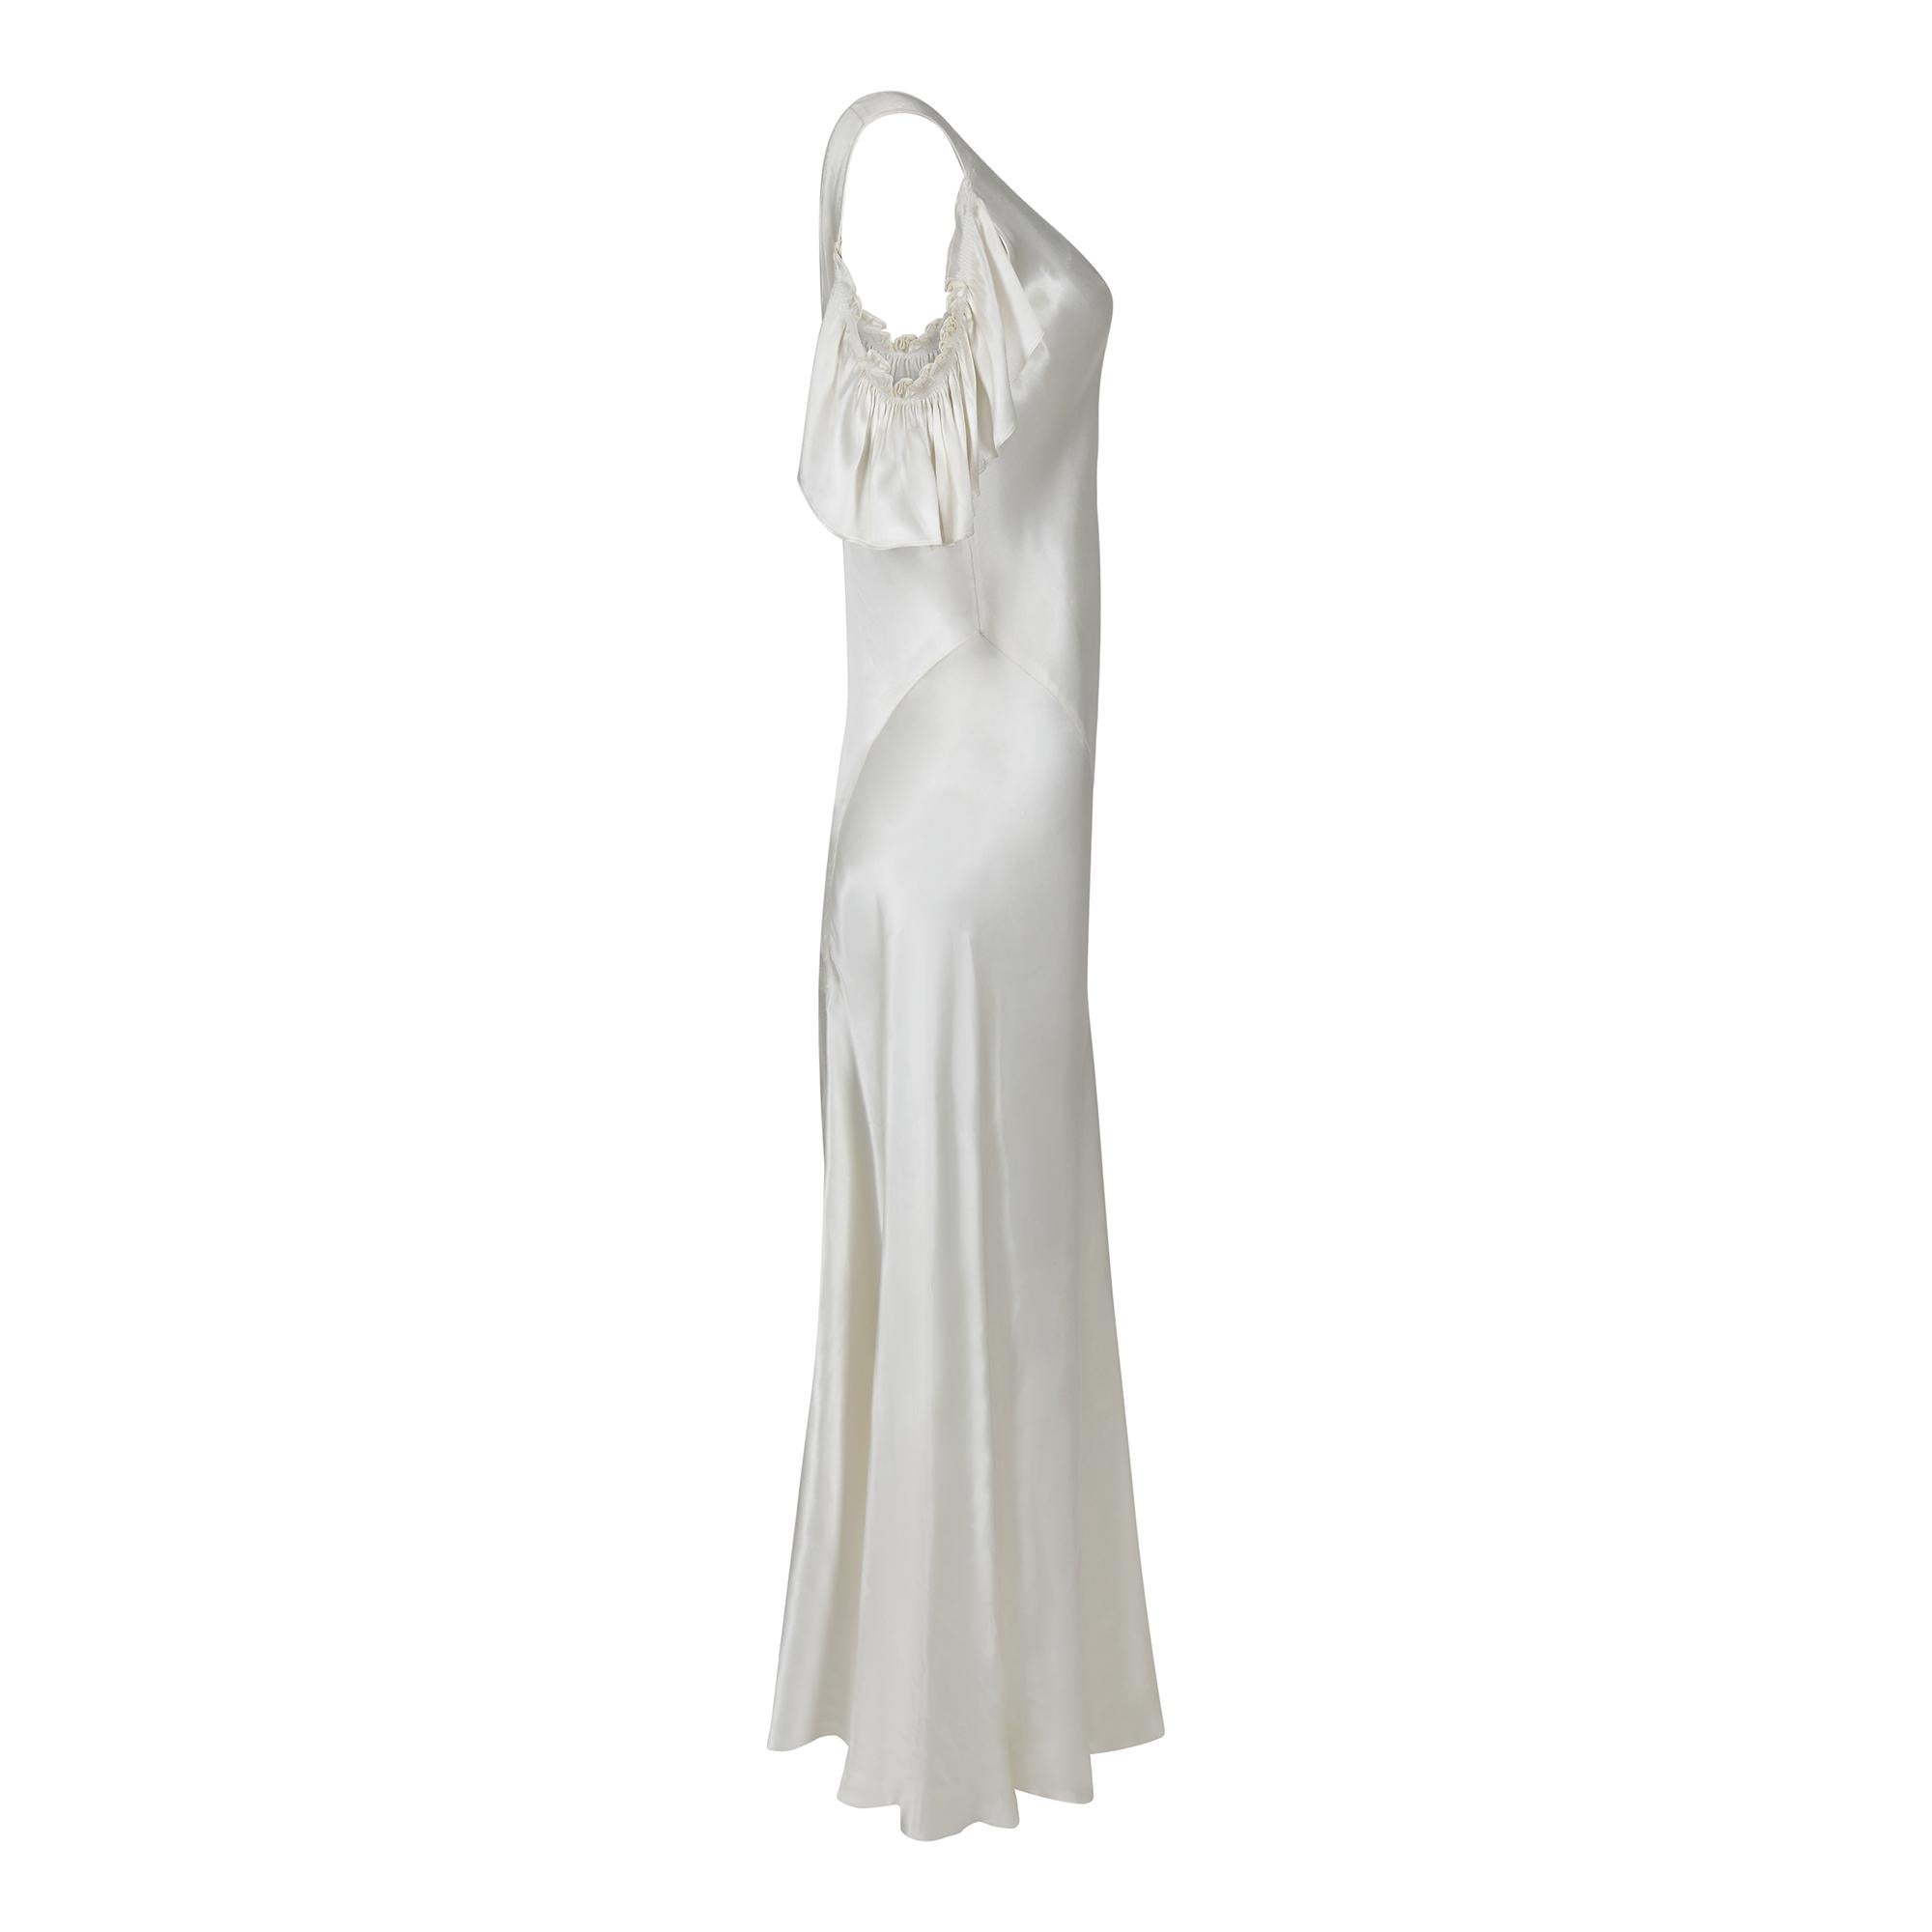 This original 1930s ivory satin wedding dress is a very wearable and has well executed bias cut panels showing considerable pattern and cutting skills. The satin is a bright and shiny ivory colour. The V neck has little bust darts for shaping and